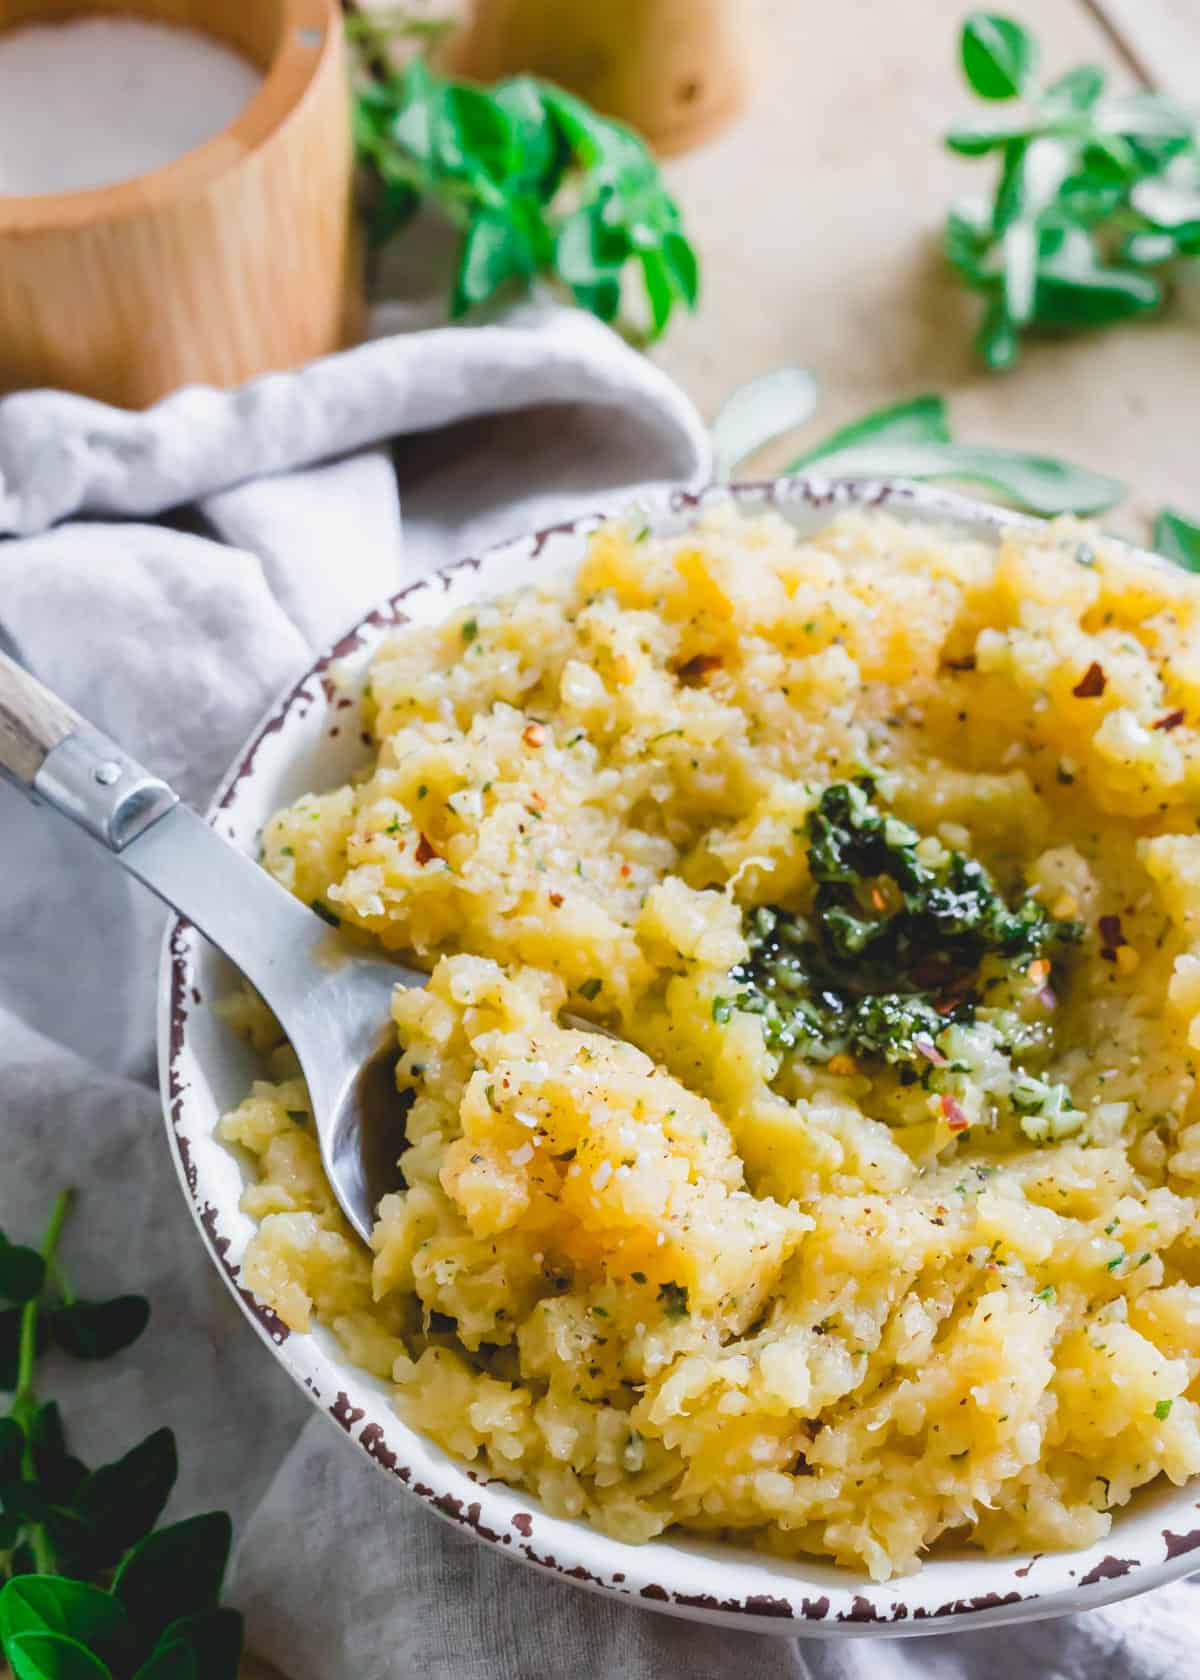 Mashed rutabaga side dish in a bowl with spoon.